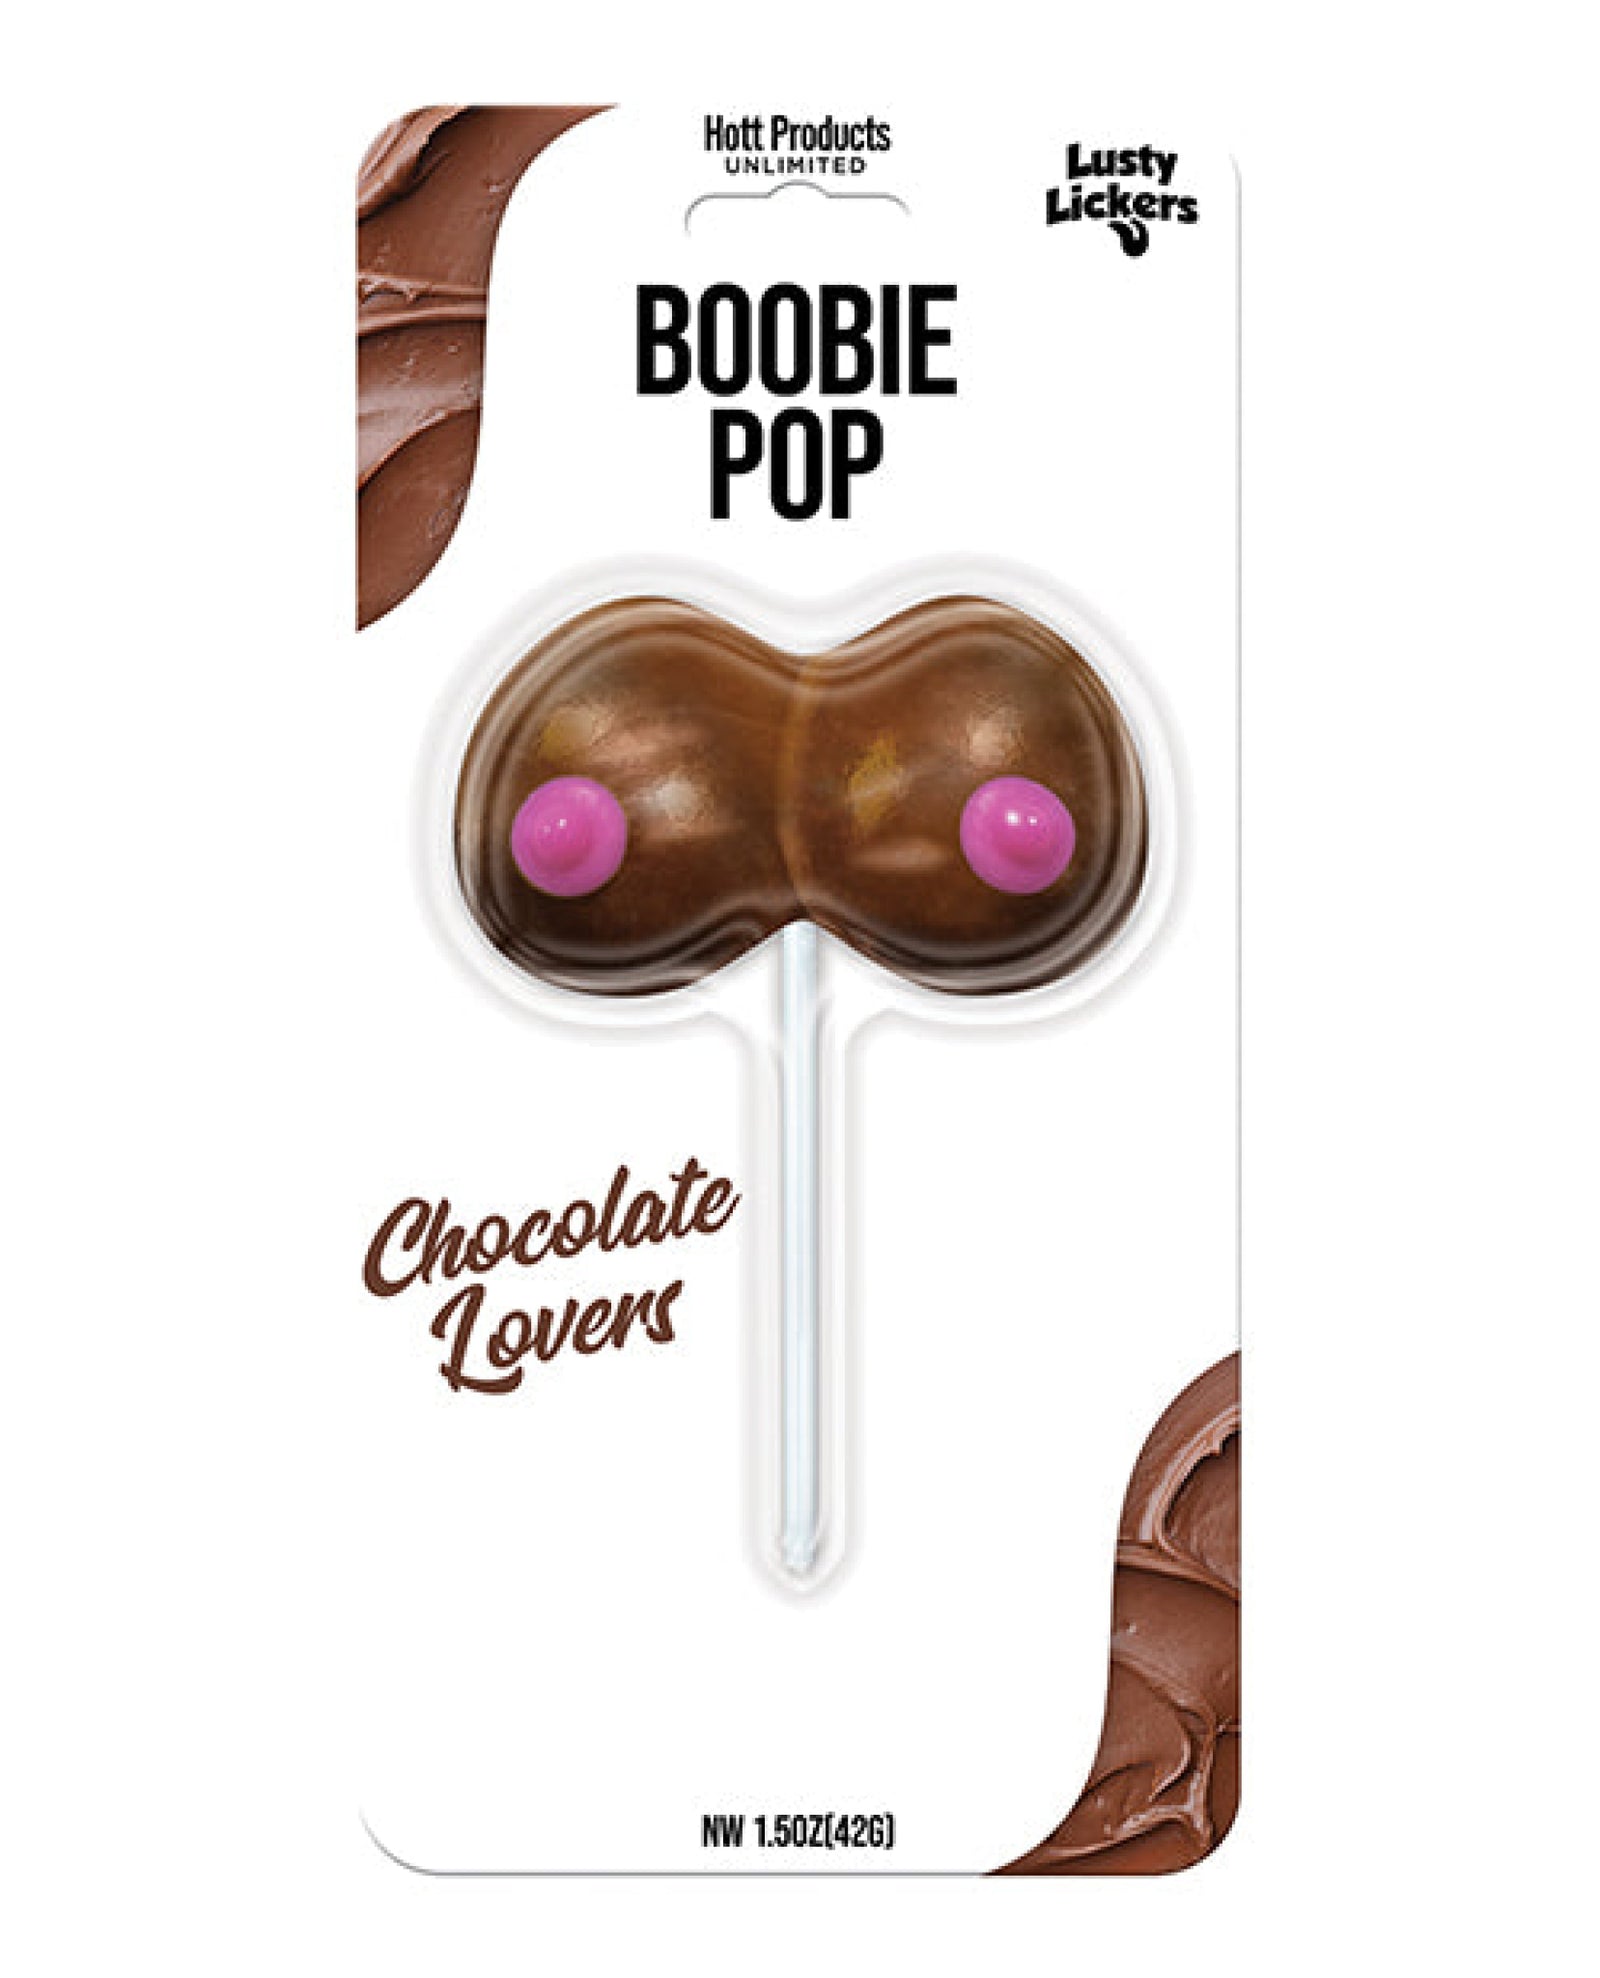 Lusty Lickers Boobie Pop - Chocolate Lovers Hott Products